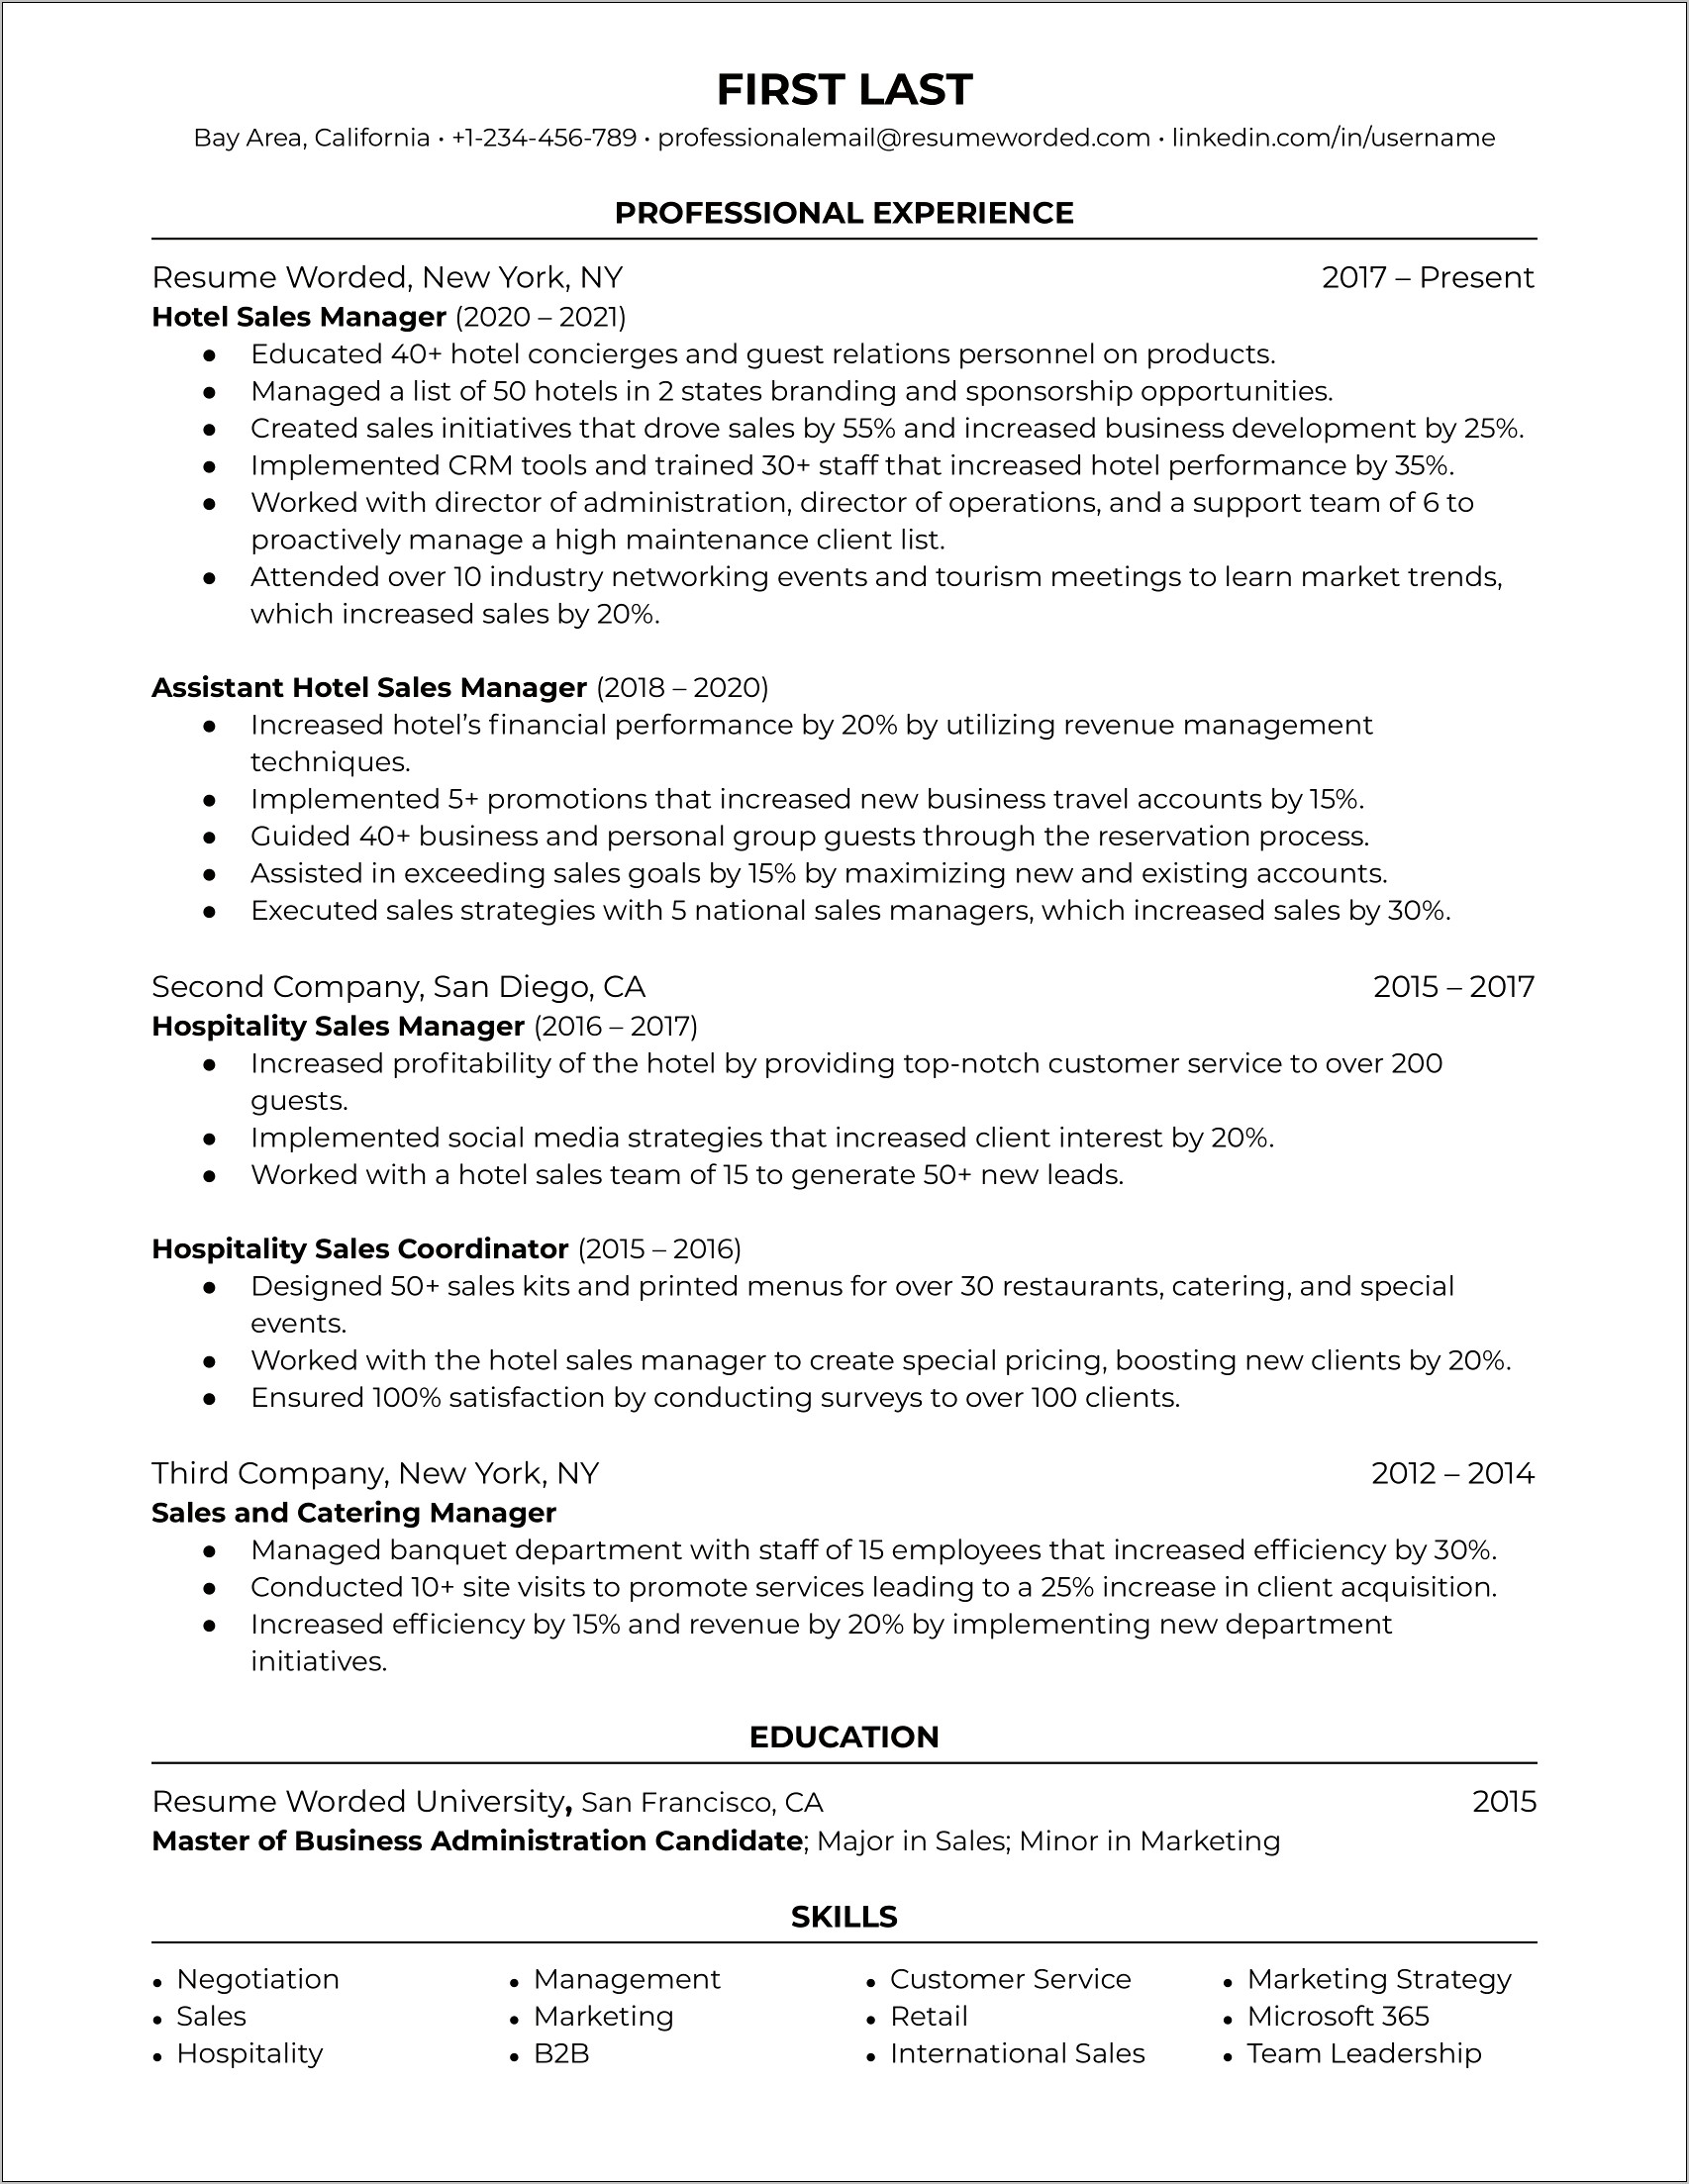 Profile Of A Sales Manager Resume